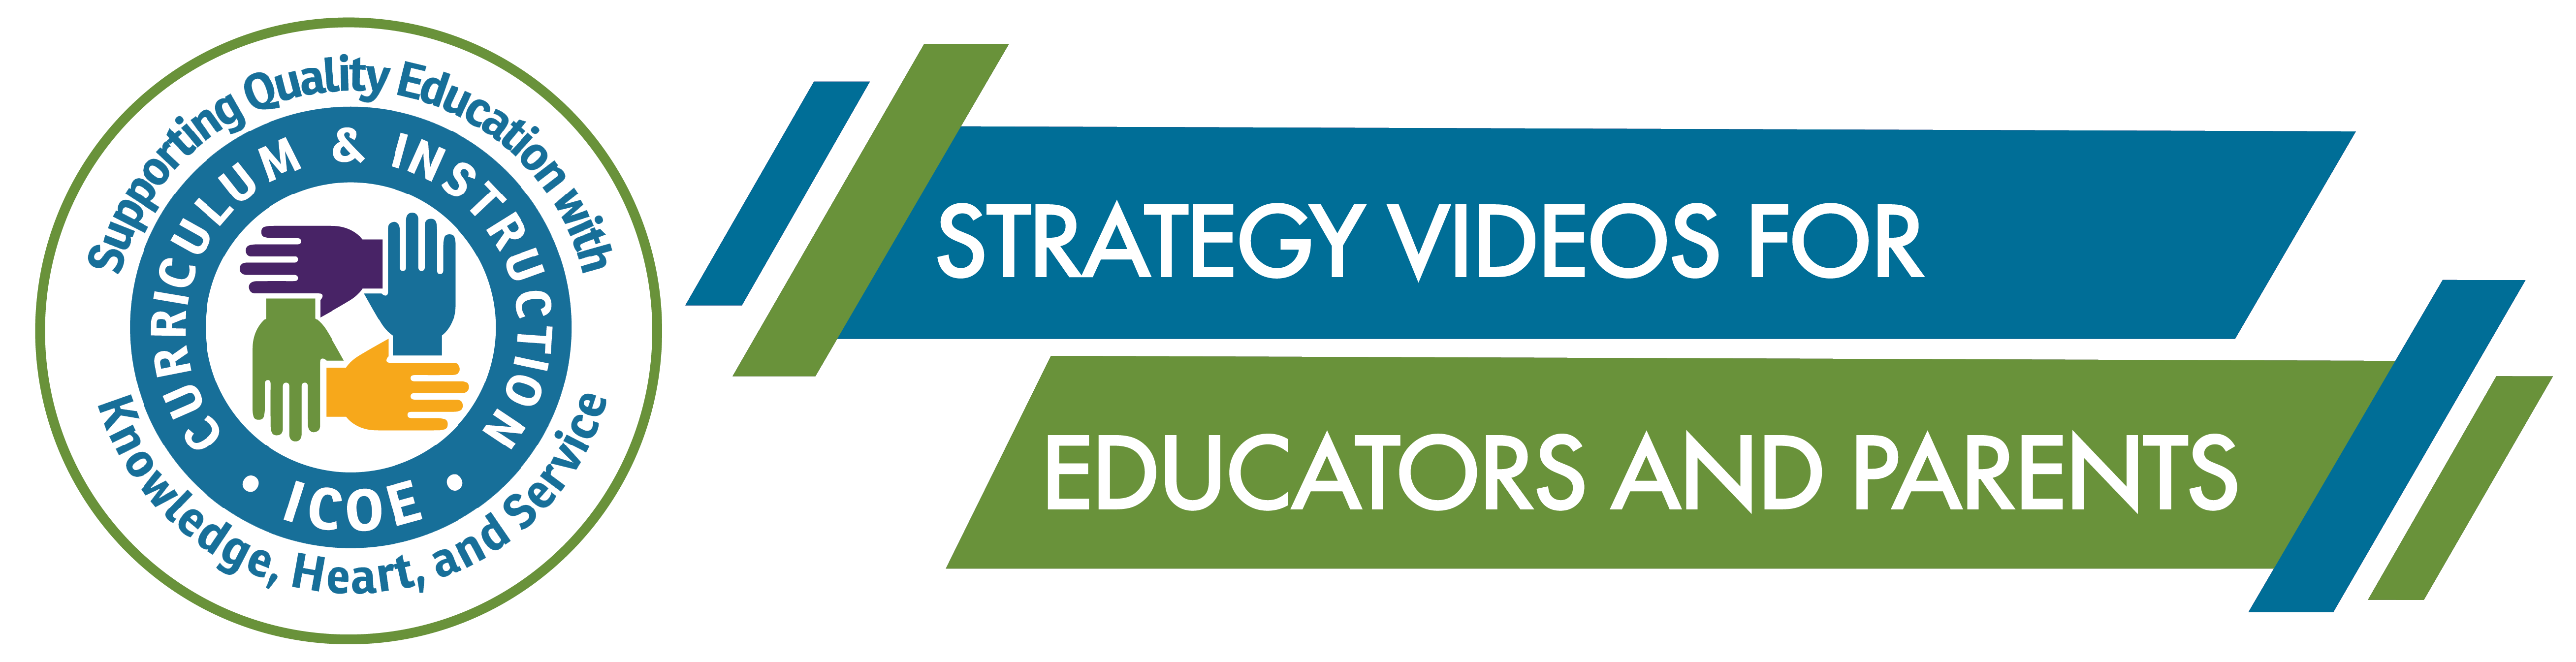 Strategy Videos for Educators and Parents Banner